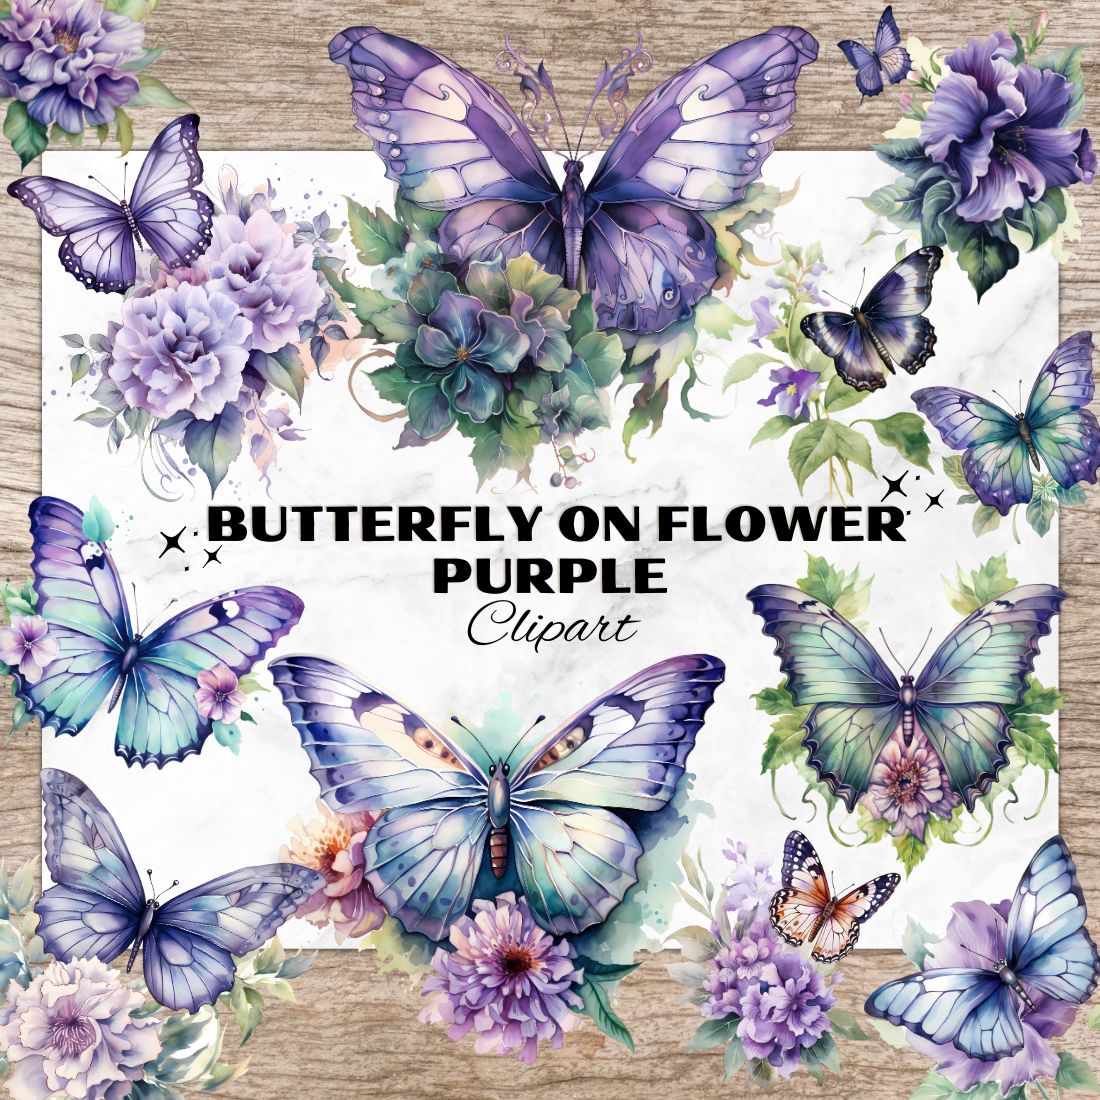 16 Butterfly On Flower PNG, Purple Colours, Butterfly Watercolor Clipart, Transparent PNG, Digital Paper Craft, Watercolor Clipart for Scrapbook, Invitation, Wall Art, T-Shirt Design cover image.